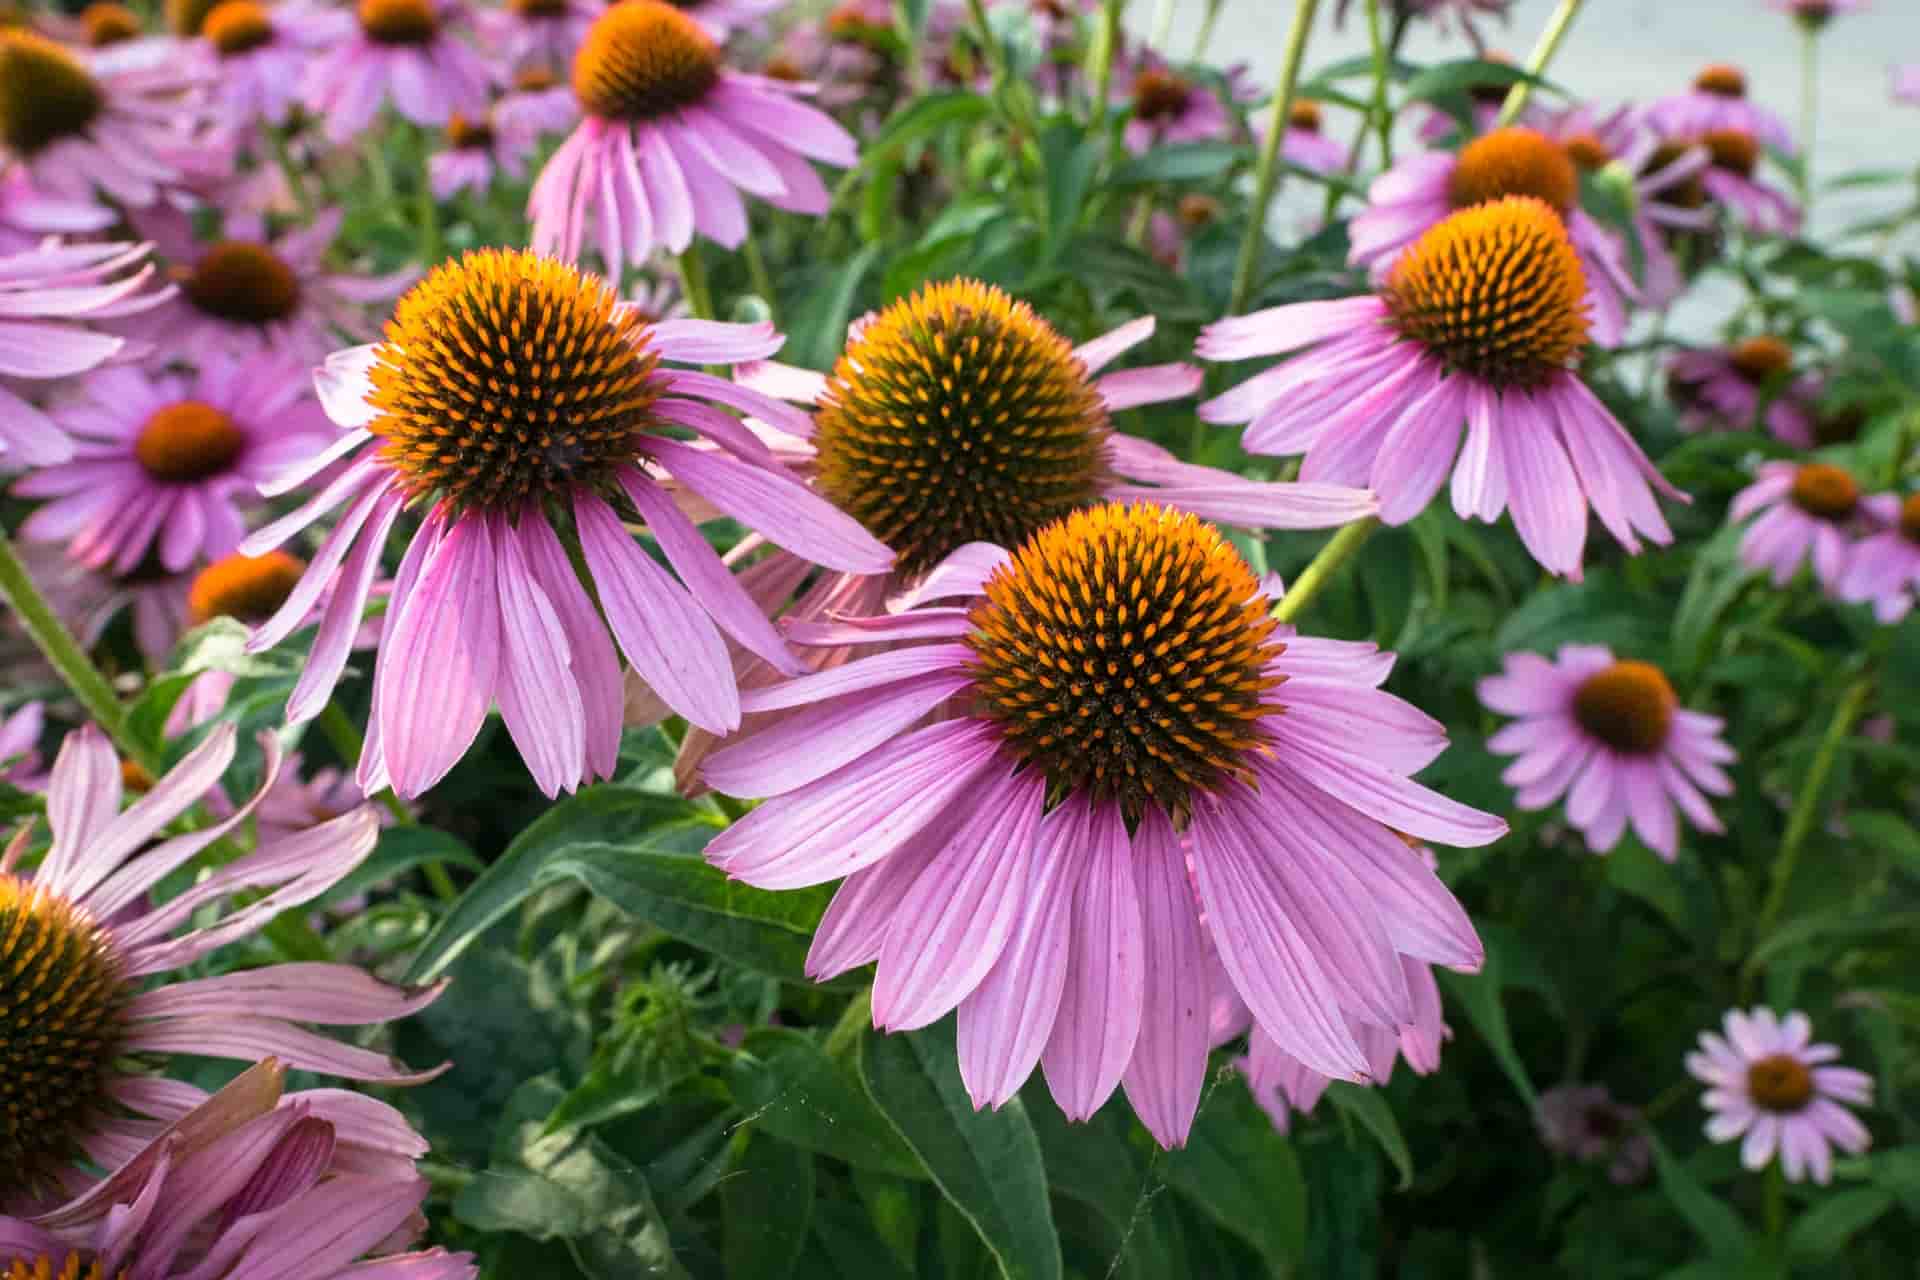 The Many Uses & Medicinal Benefits of Echinacea